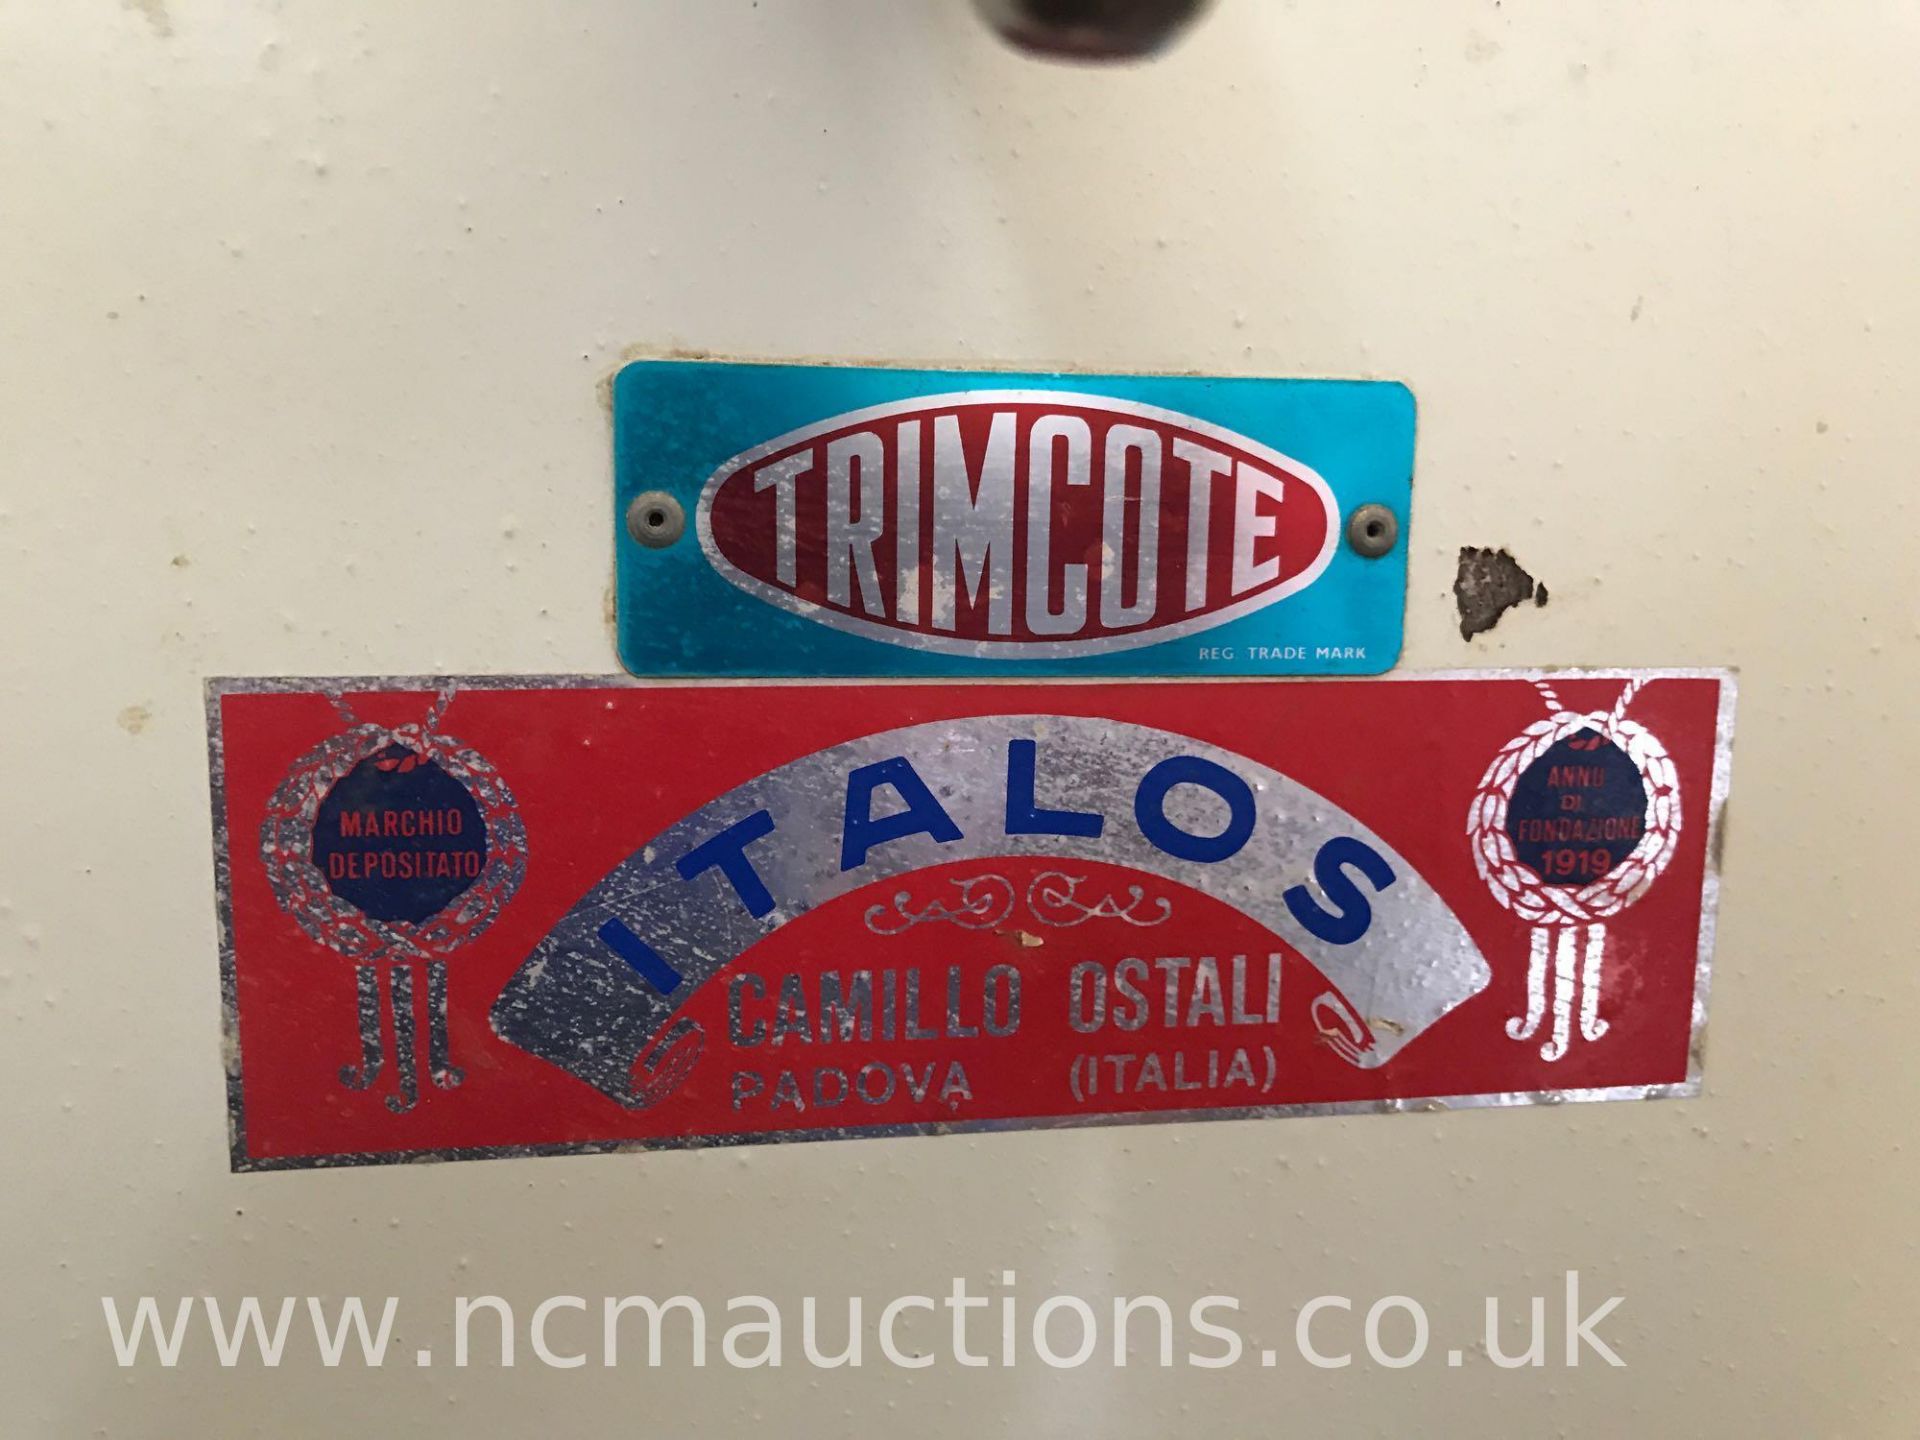 Trimcote Pastry Roller - Image 2 of 6